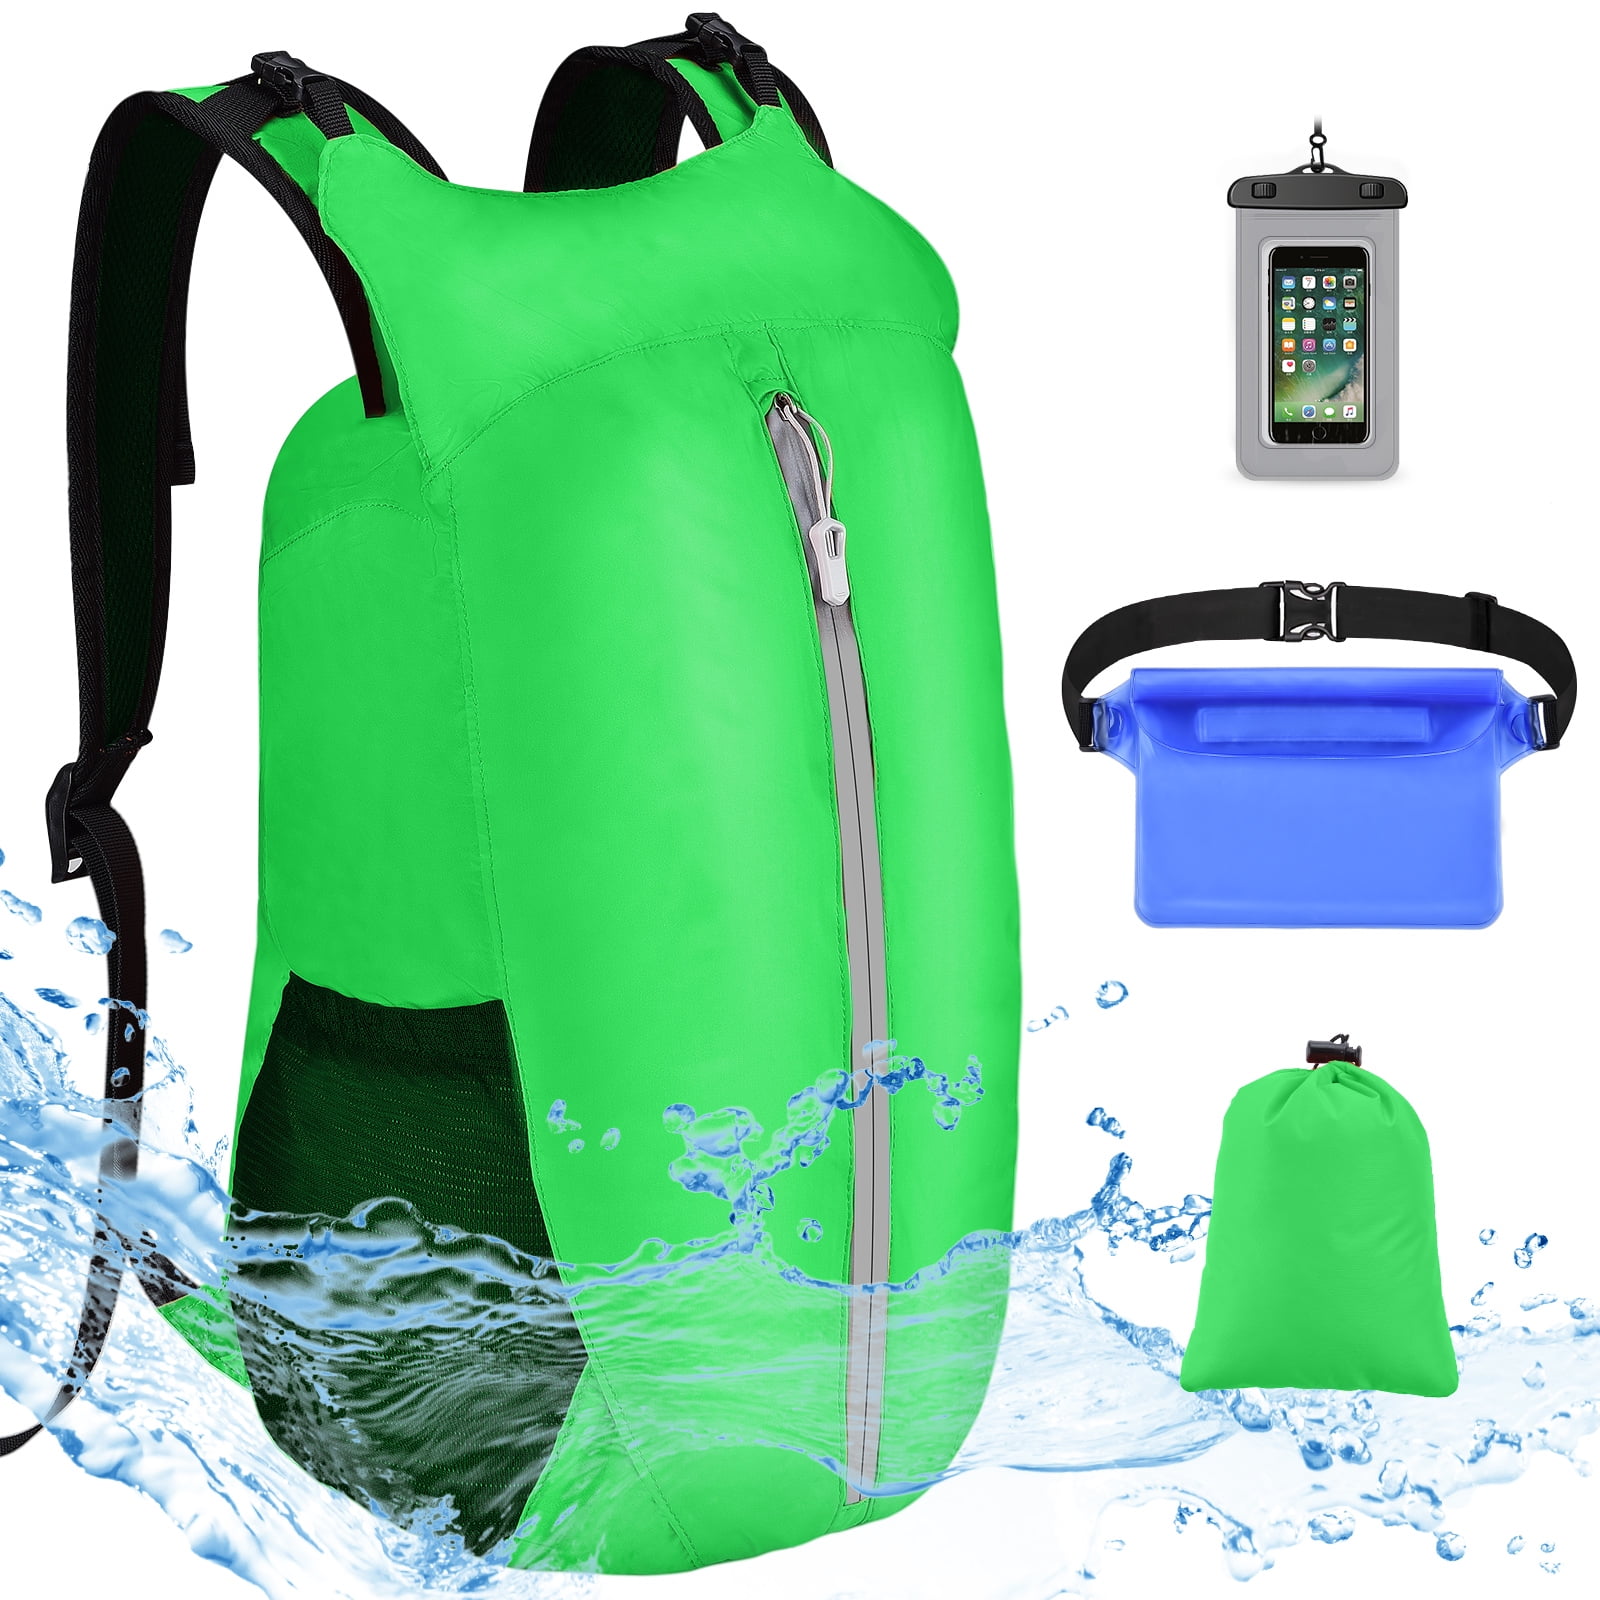 DryBag Waterproof Wet Dry Bag Backpack Universal Cell Phone Pouch Storage Bag Water Proof Case IPX8 10L/20L/40L Floating Dry Sack for Kayaking Beach Boating Sailing Swimming Hiking Camping Outdoor 